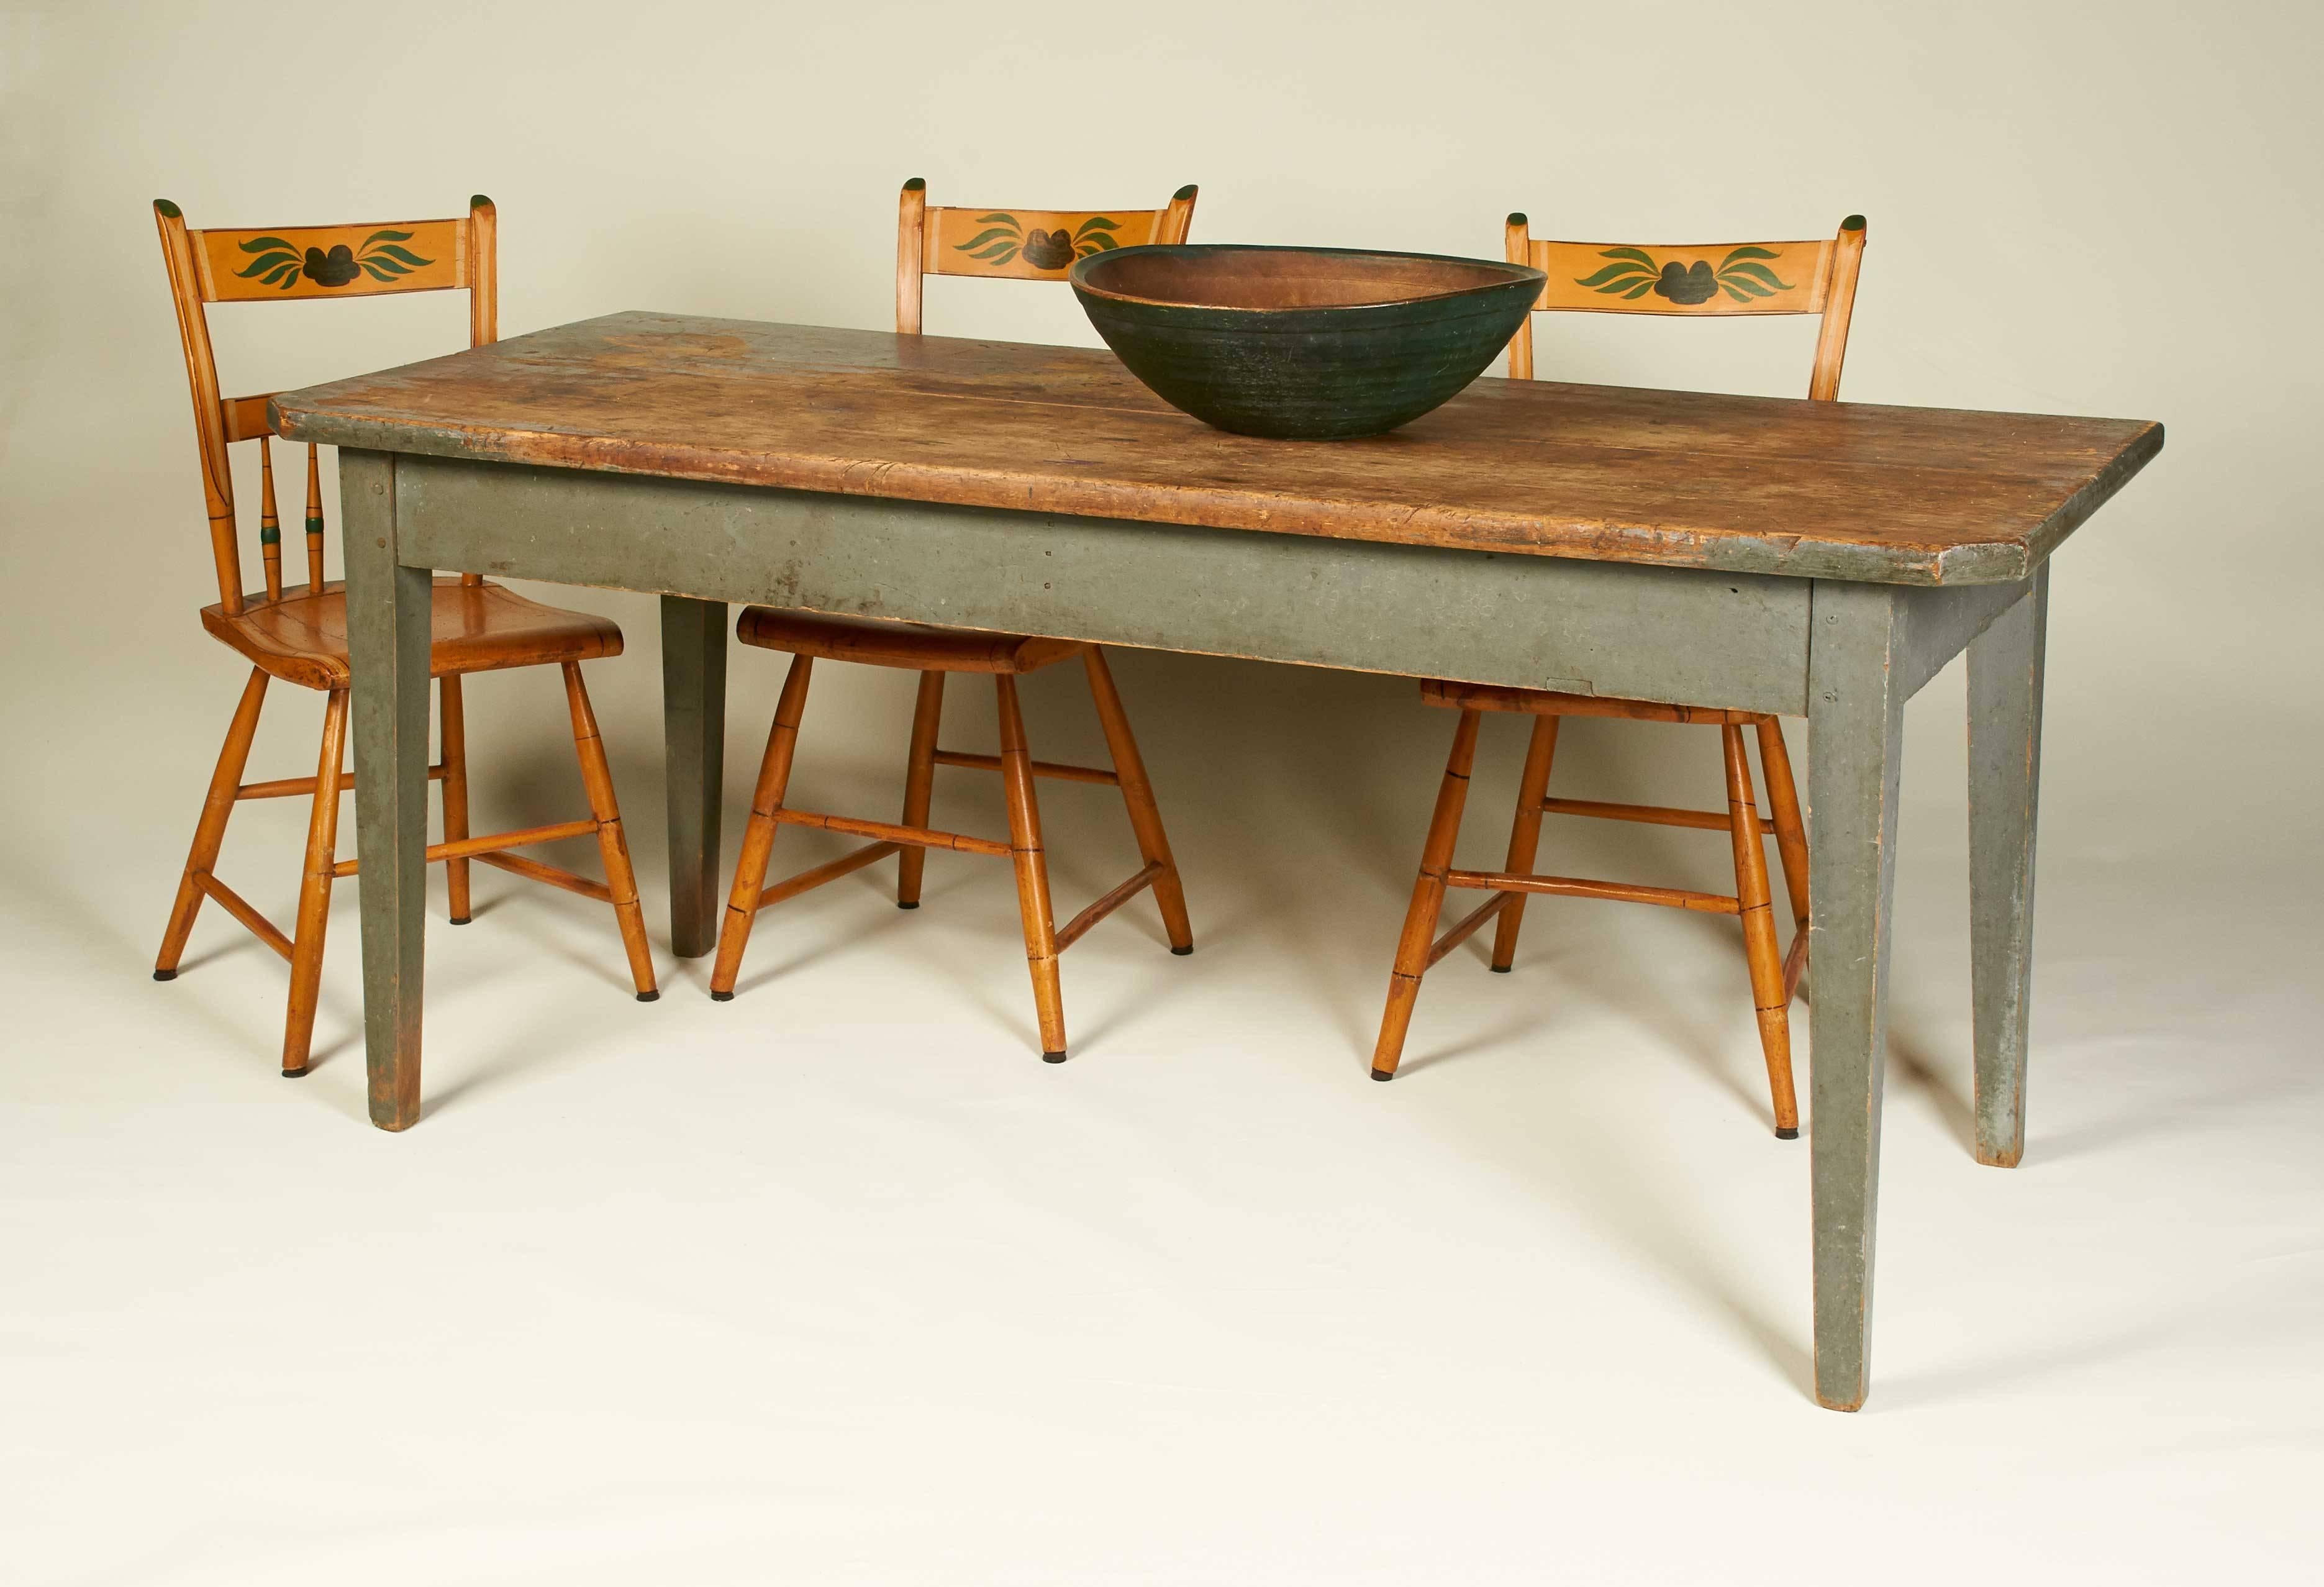 A Pennsylvania farm table with two-board scrubbed top above square tapered legs retaining a wonderful blue-grey painted finish. Perfect as a country dining or breakfast table. Can seat six.